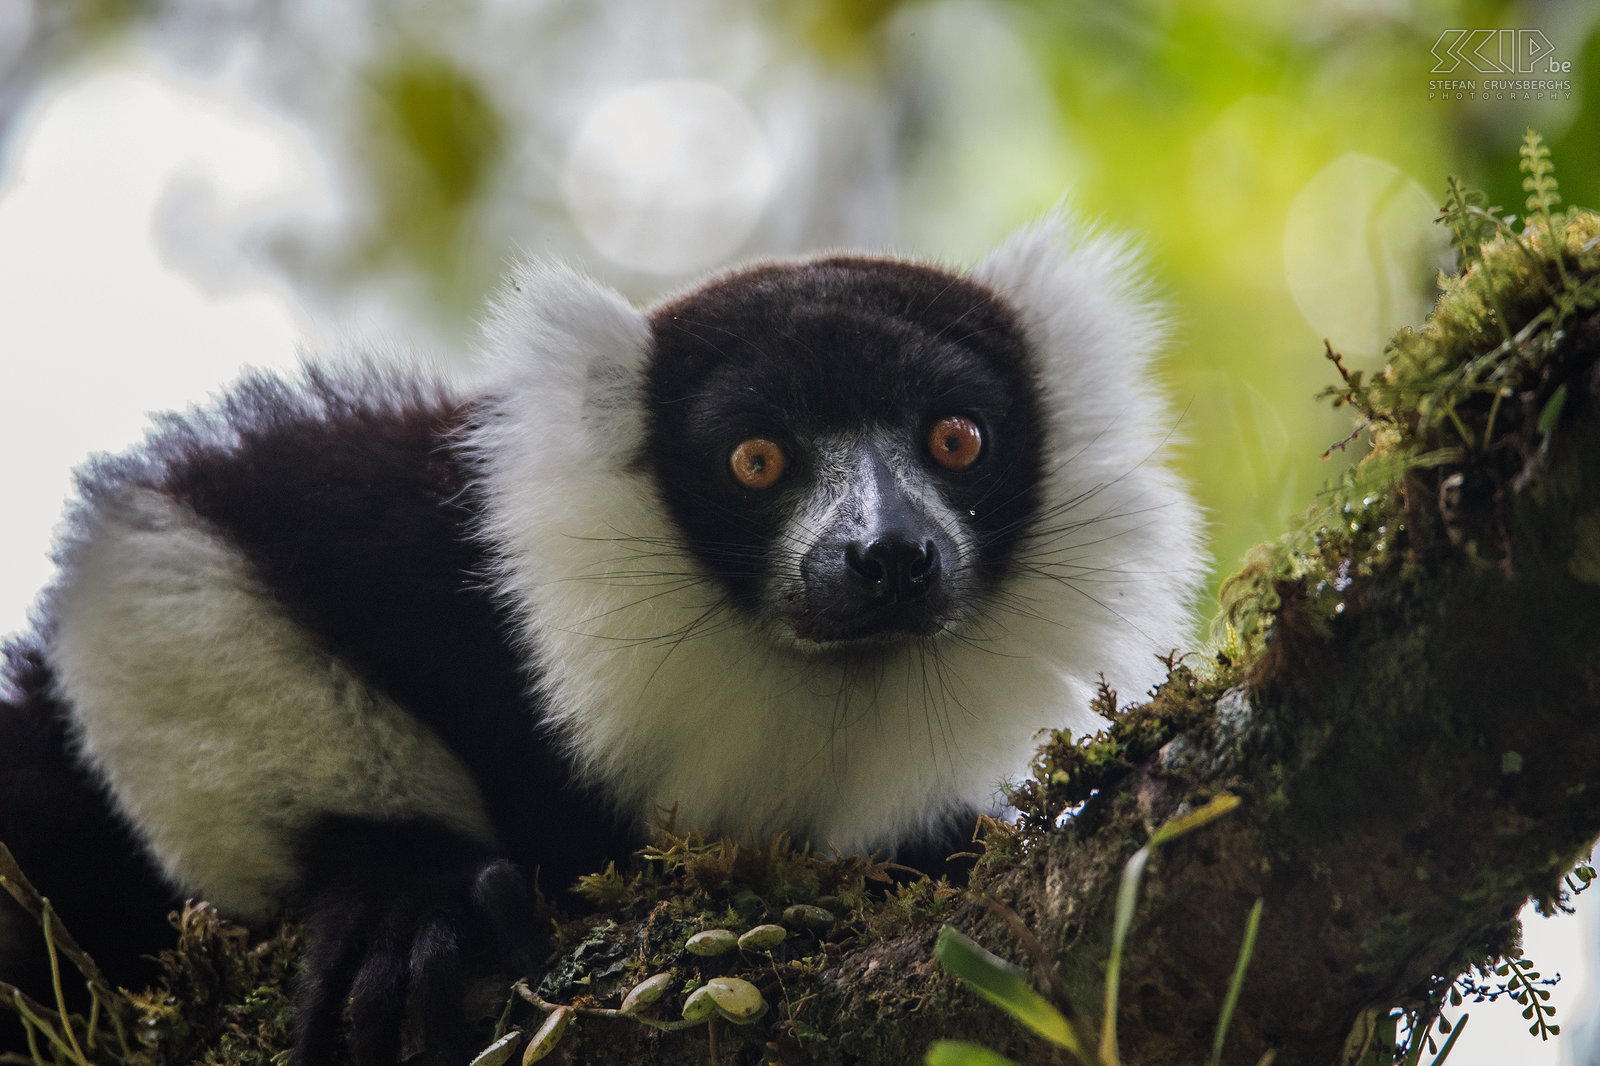 Mantadia - Black and white ruffed lemur The black-and-white ruffed lemur (Varecia variegata) is an endangered species. They are quite big and spending most of their time in the high canopy of the rainforest. They also make impressive loud sounds.  Stefan Cruysberghs